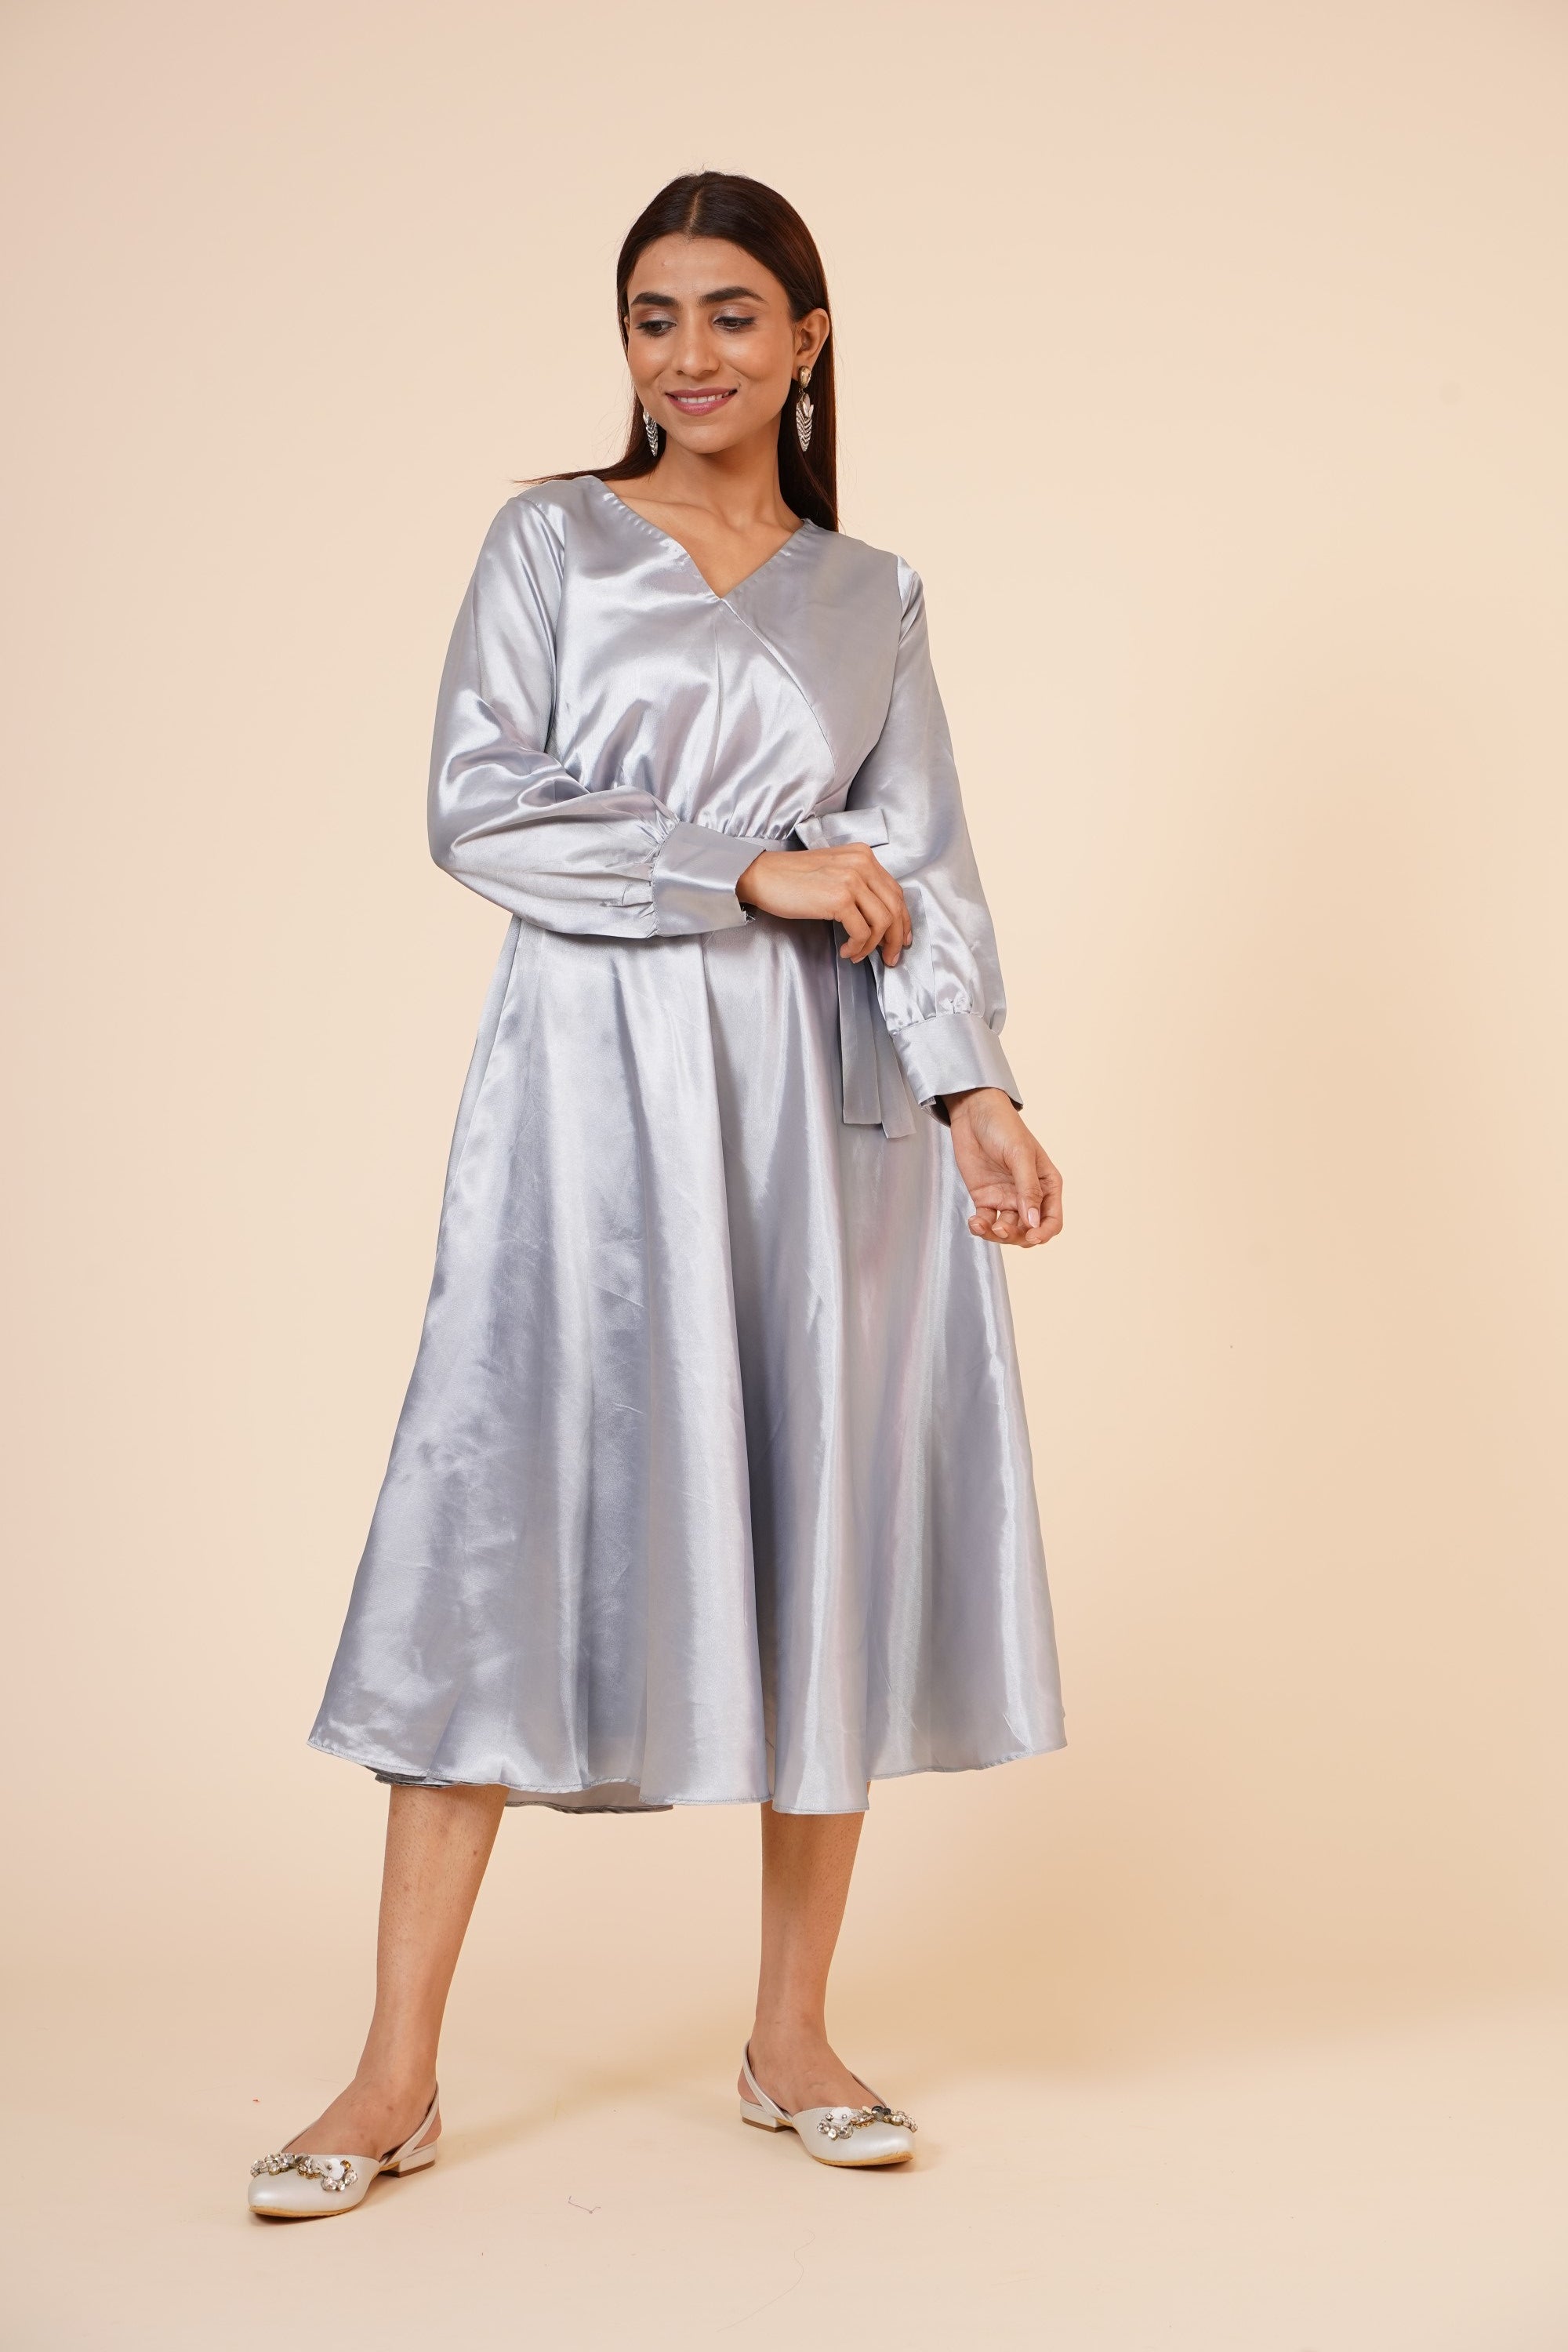 Women's Empire Line With Cuff Satin Wrap Dress Grey - MIRACOLOS by Ruchi